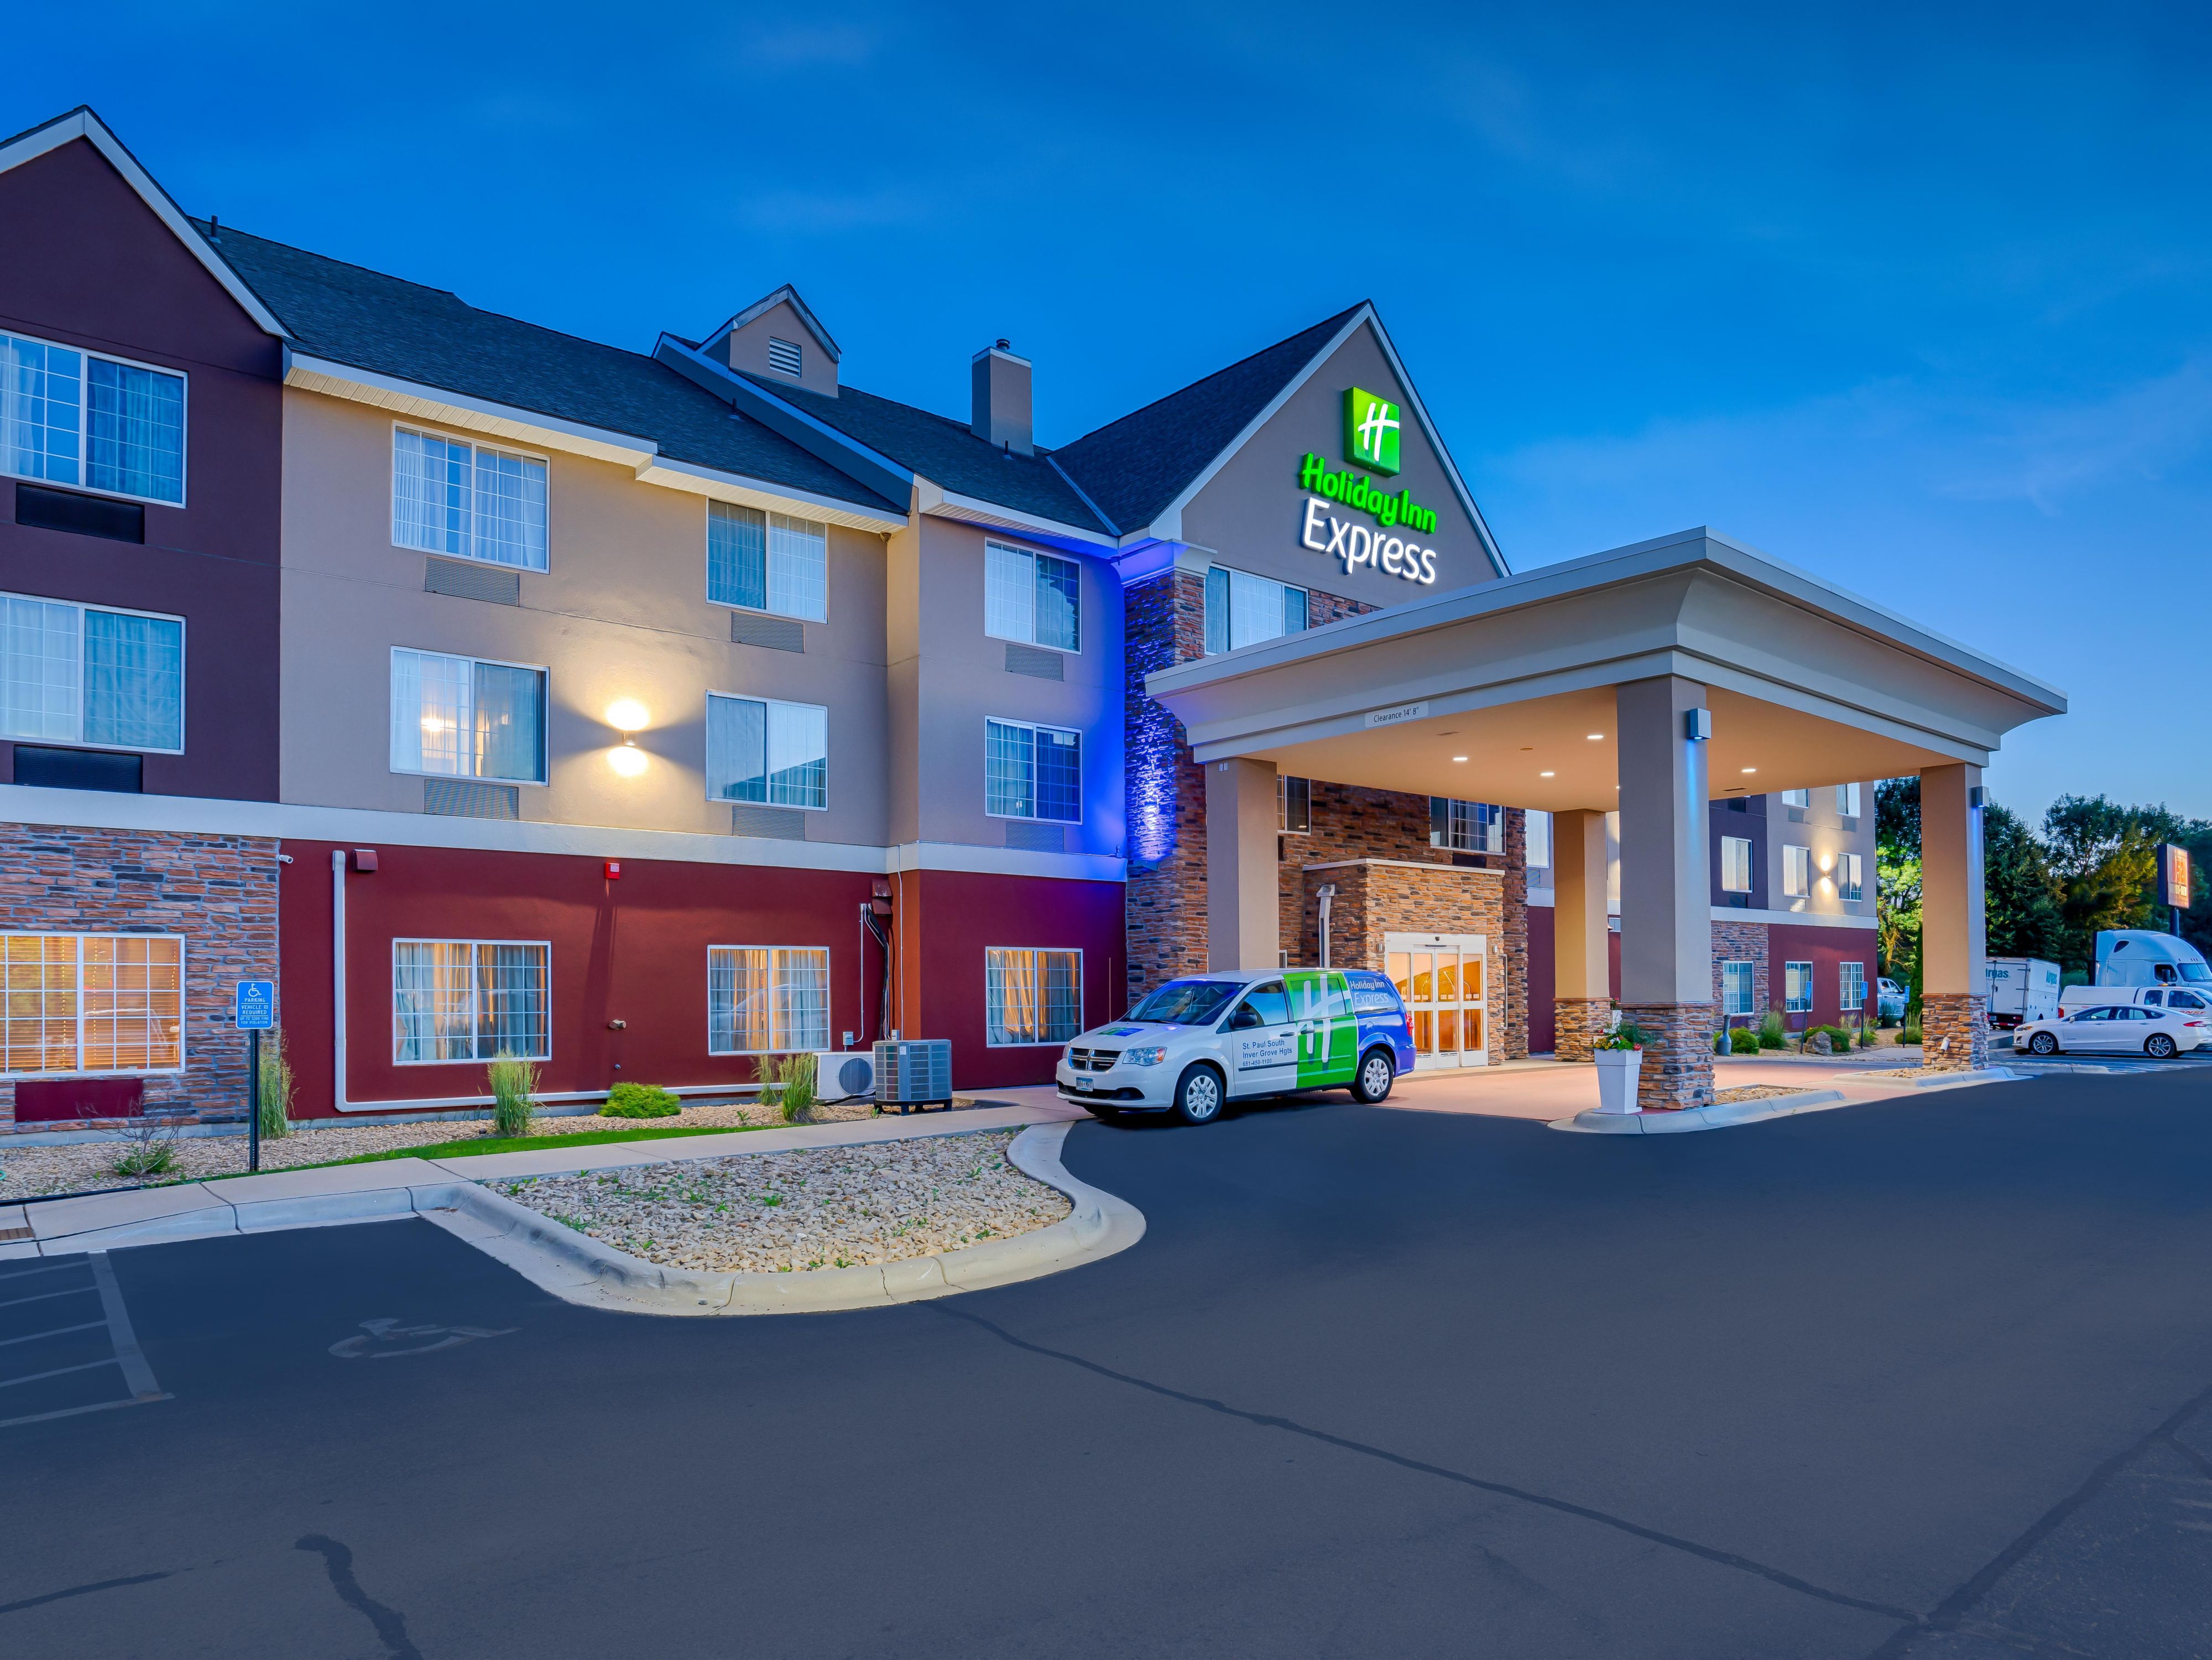 Book Comfort Inn Hotels in South St Paul, MN - Choice Hotels